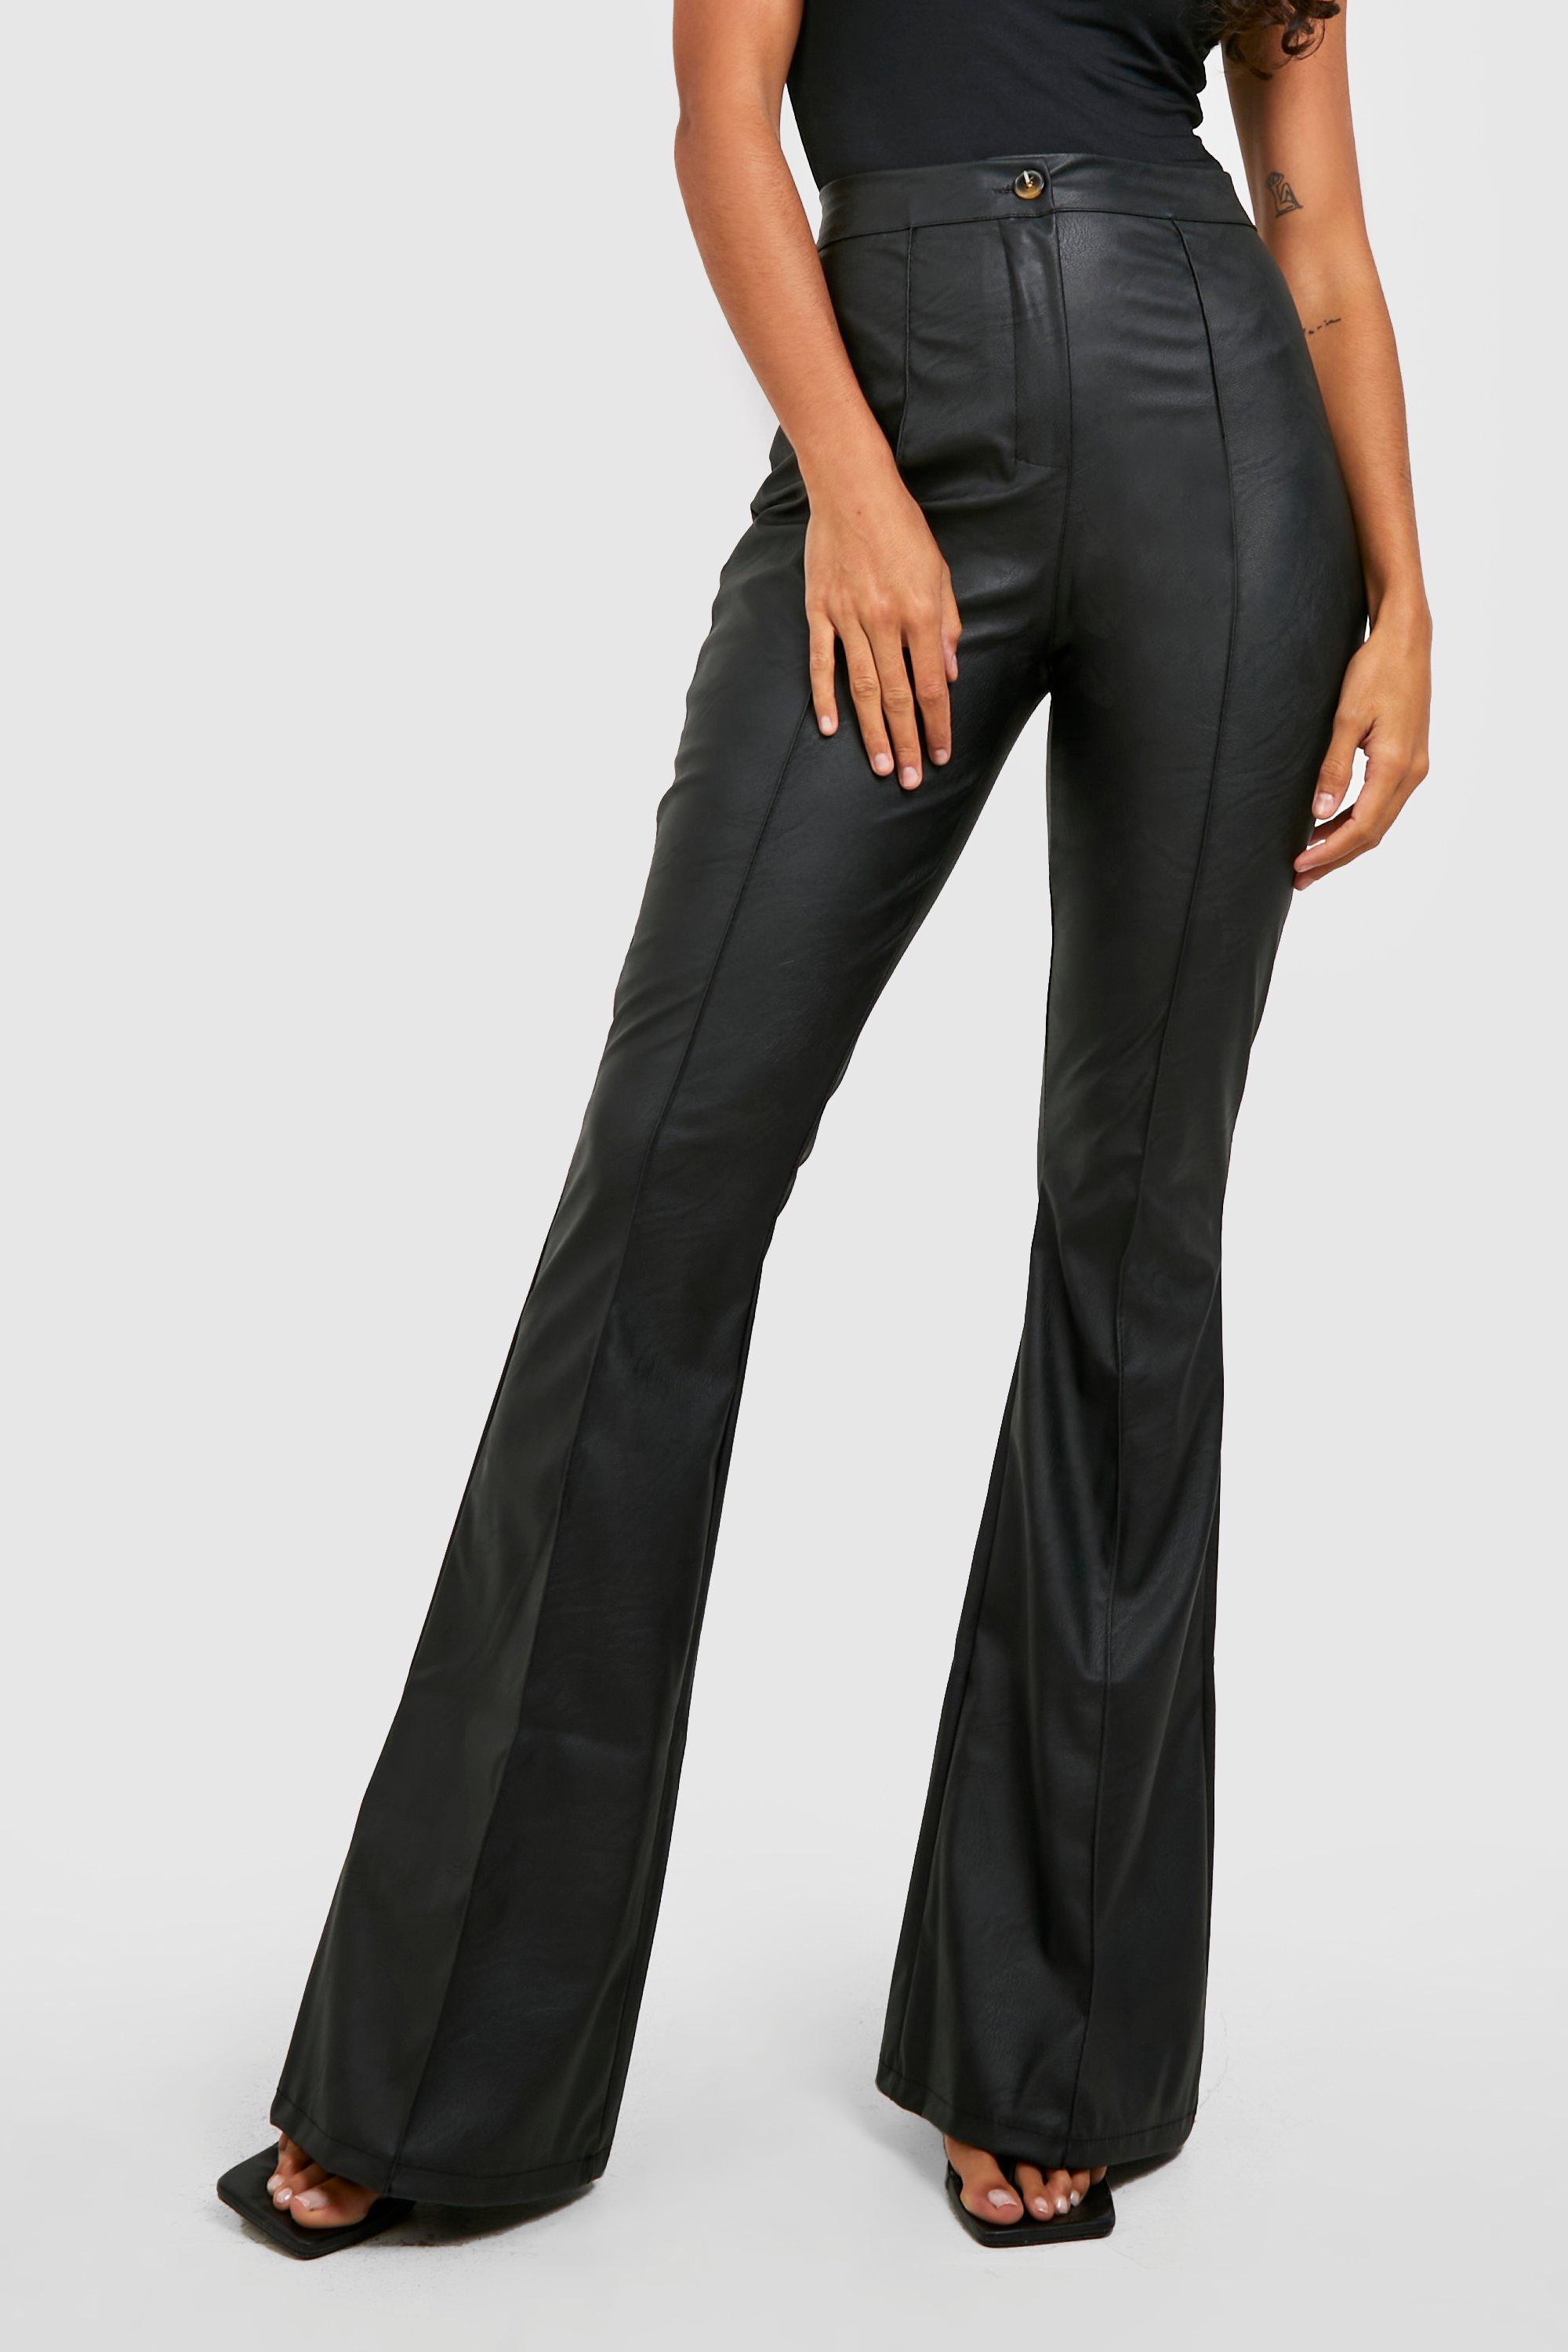 Womens Pants Flare Leather, Flare Leather Trousers Women